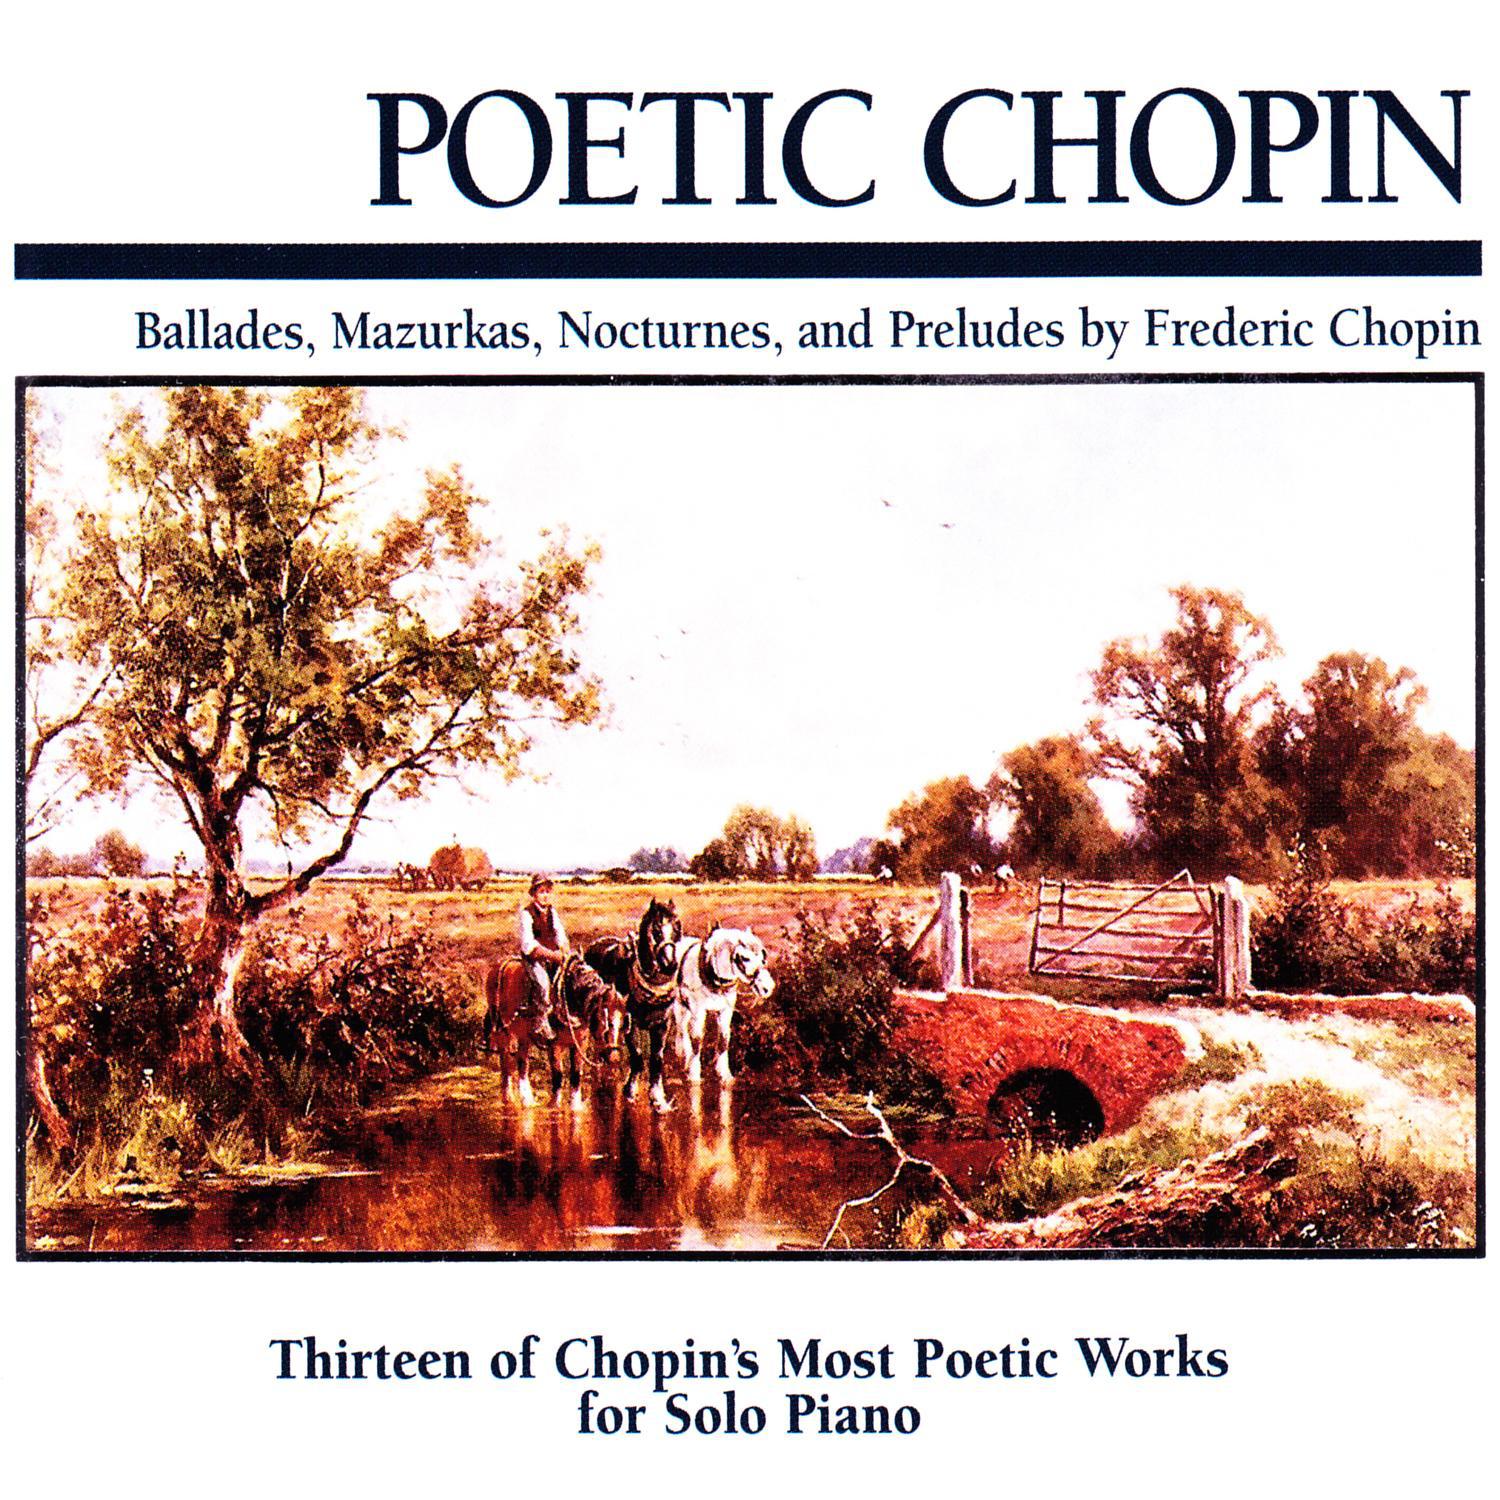 Poetic Chopin: Ballades, Mazurkas, Nocturnes, And Preludes by Frédéric Chopin